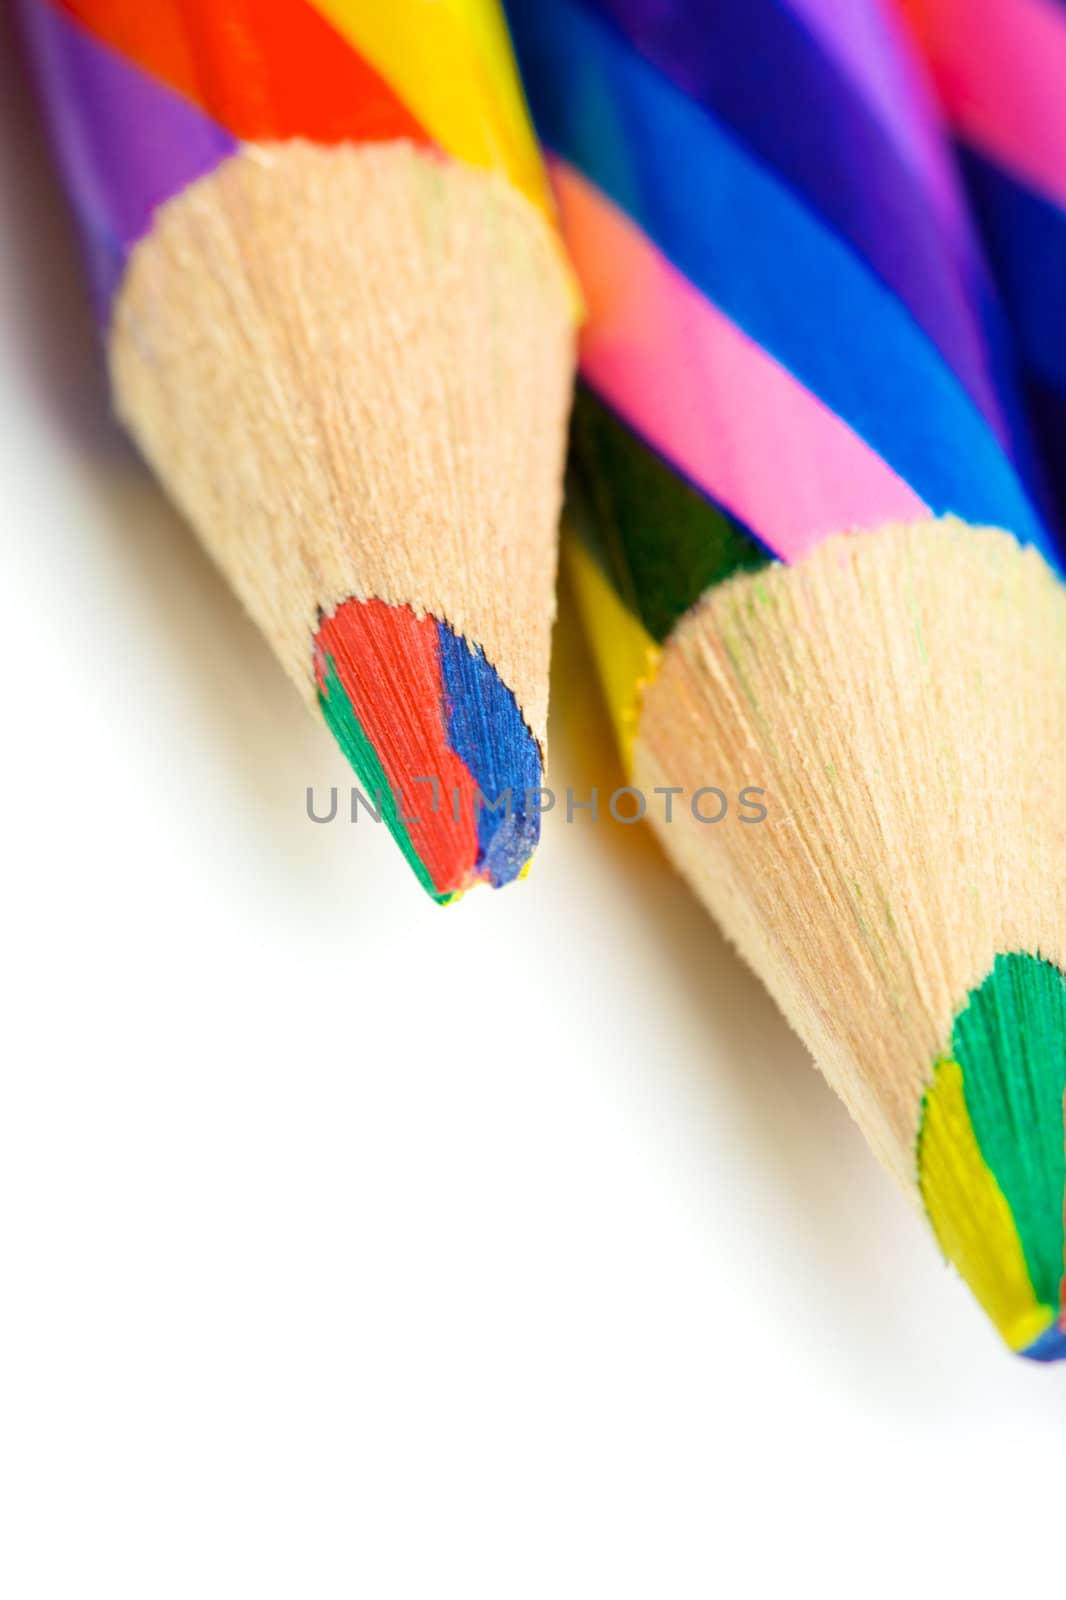 Colorful Pencils by petr_malyshev